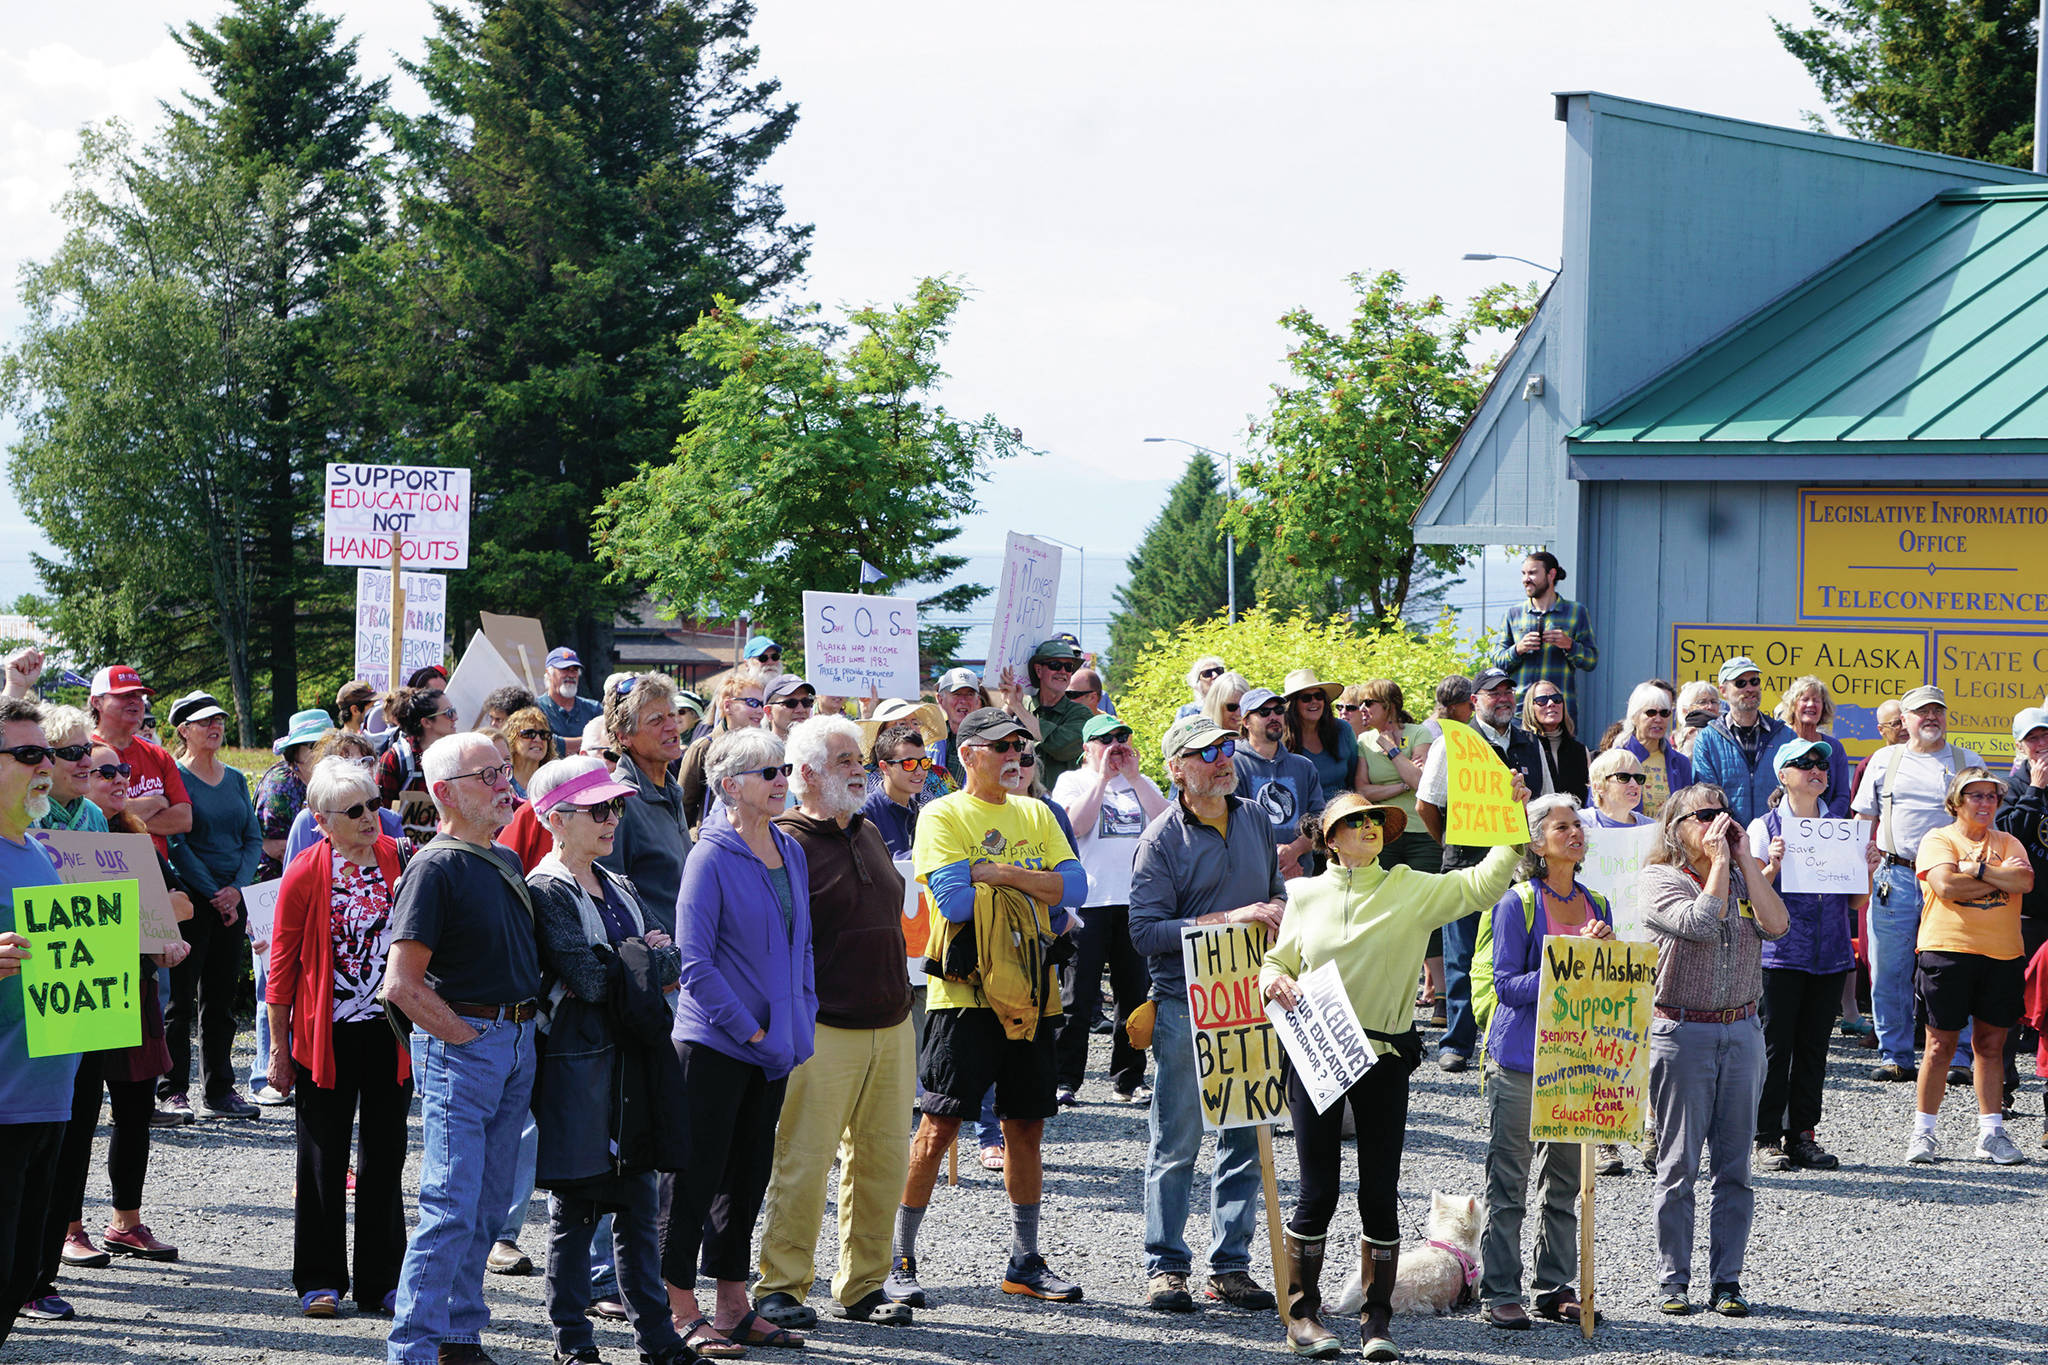 Demonstrators listen to speakers at a rally Sunday, July 28, 2019, against Gov. Mike Dunleavy’s budget cuts at the Legislative Information Office, Homer, Alaska. (Photo by Michael Armstrong/Homer News).